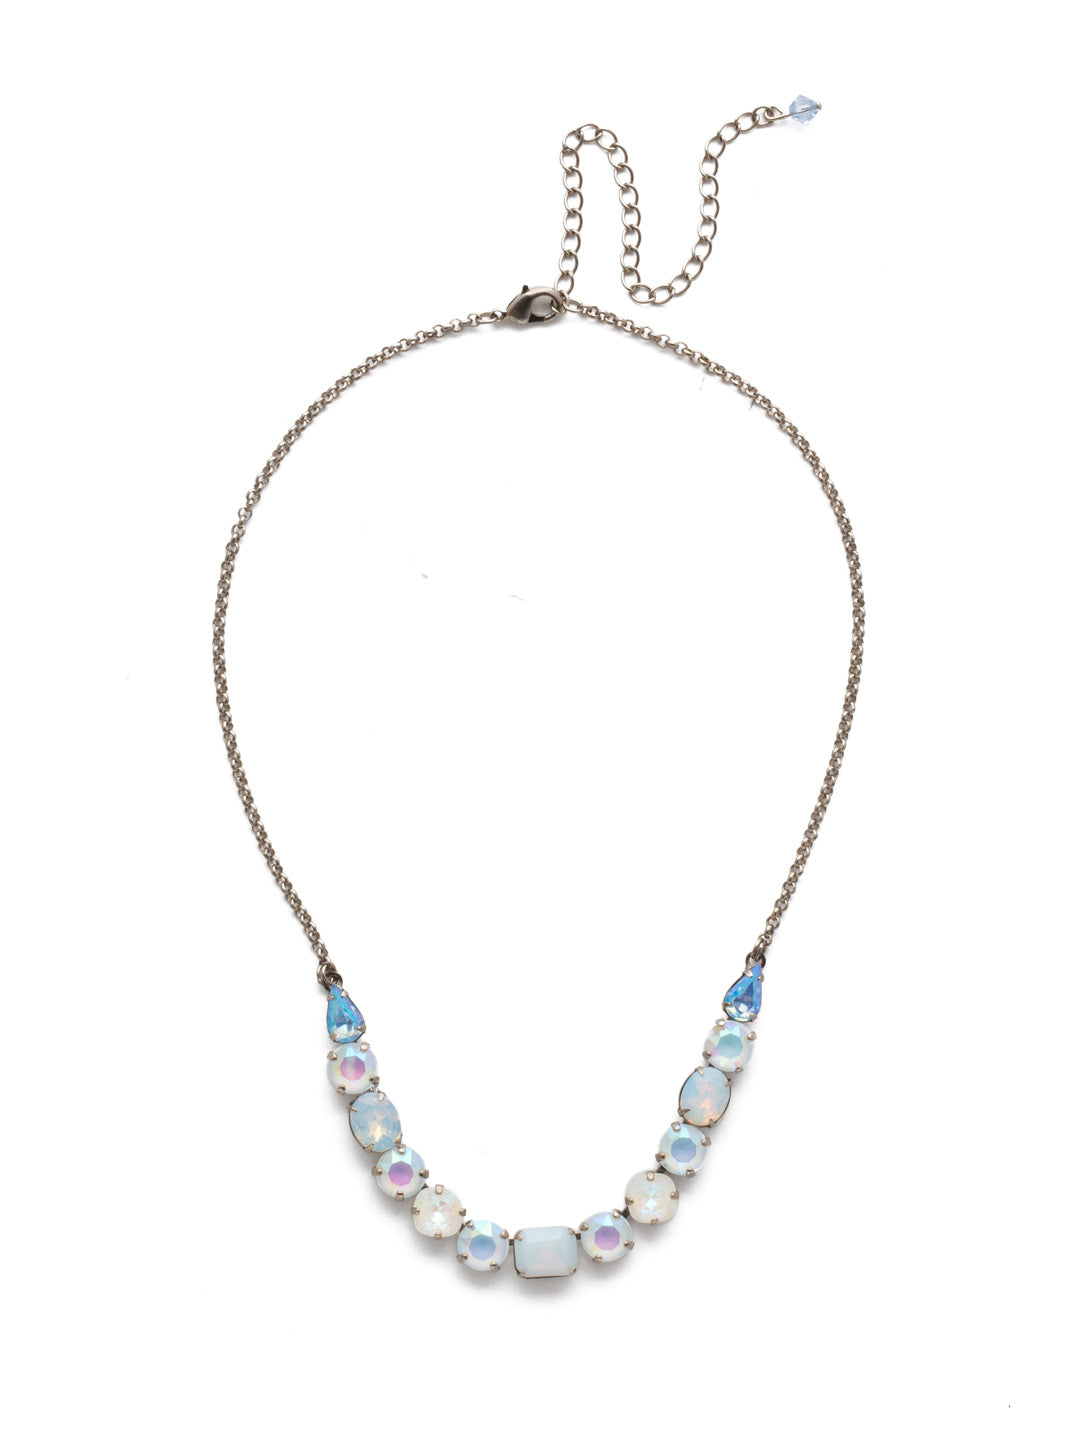 Tansy Half Line Tennis Necklace - NDQ14ASGLC - <p>Oval, round, emerald, pear and cushion cut crystals are accented by a delicate chain for subtle sparkle that looks great layered or worn solo. From Sorrelli's Glacier collection in our Antique Silver-tone finish.</p>